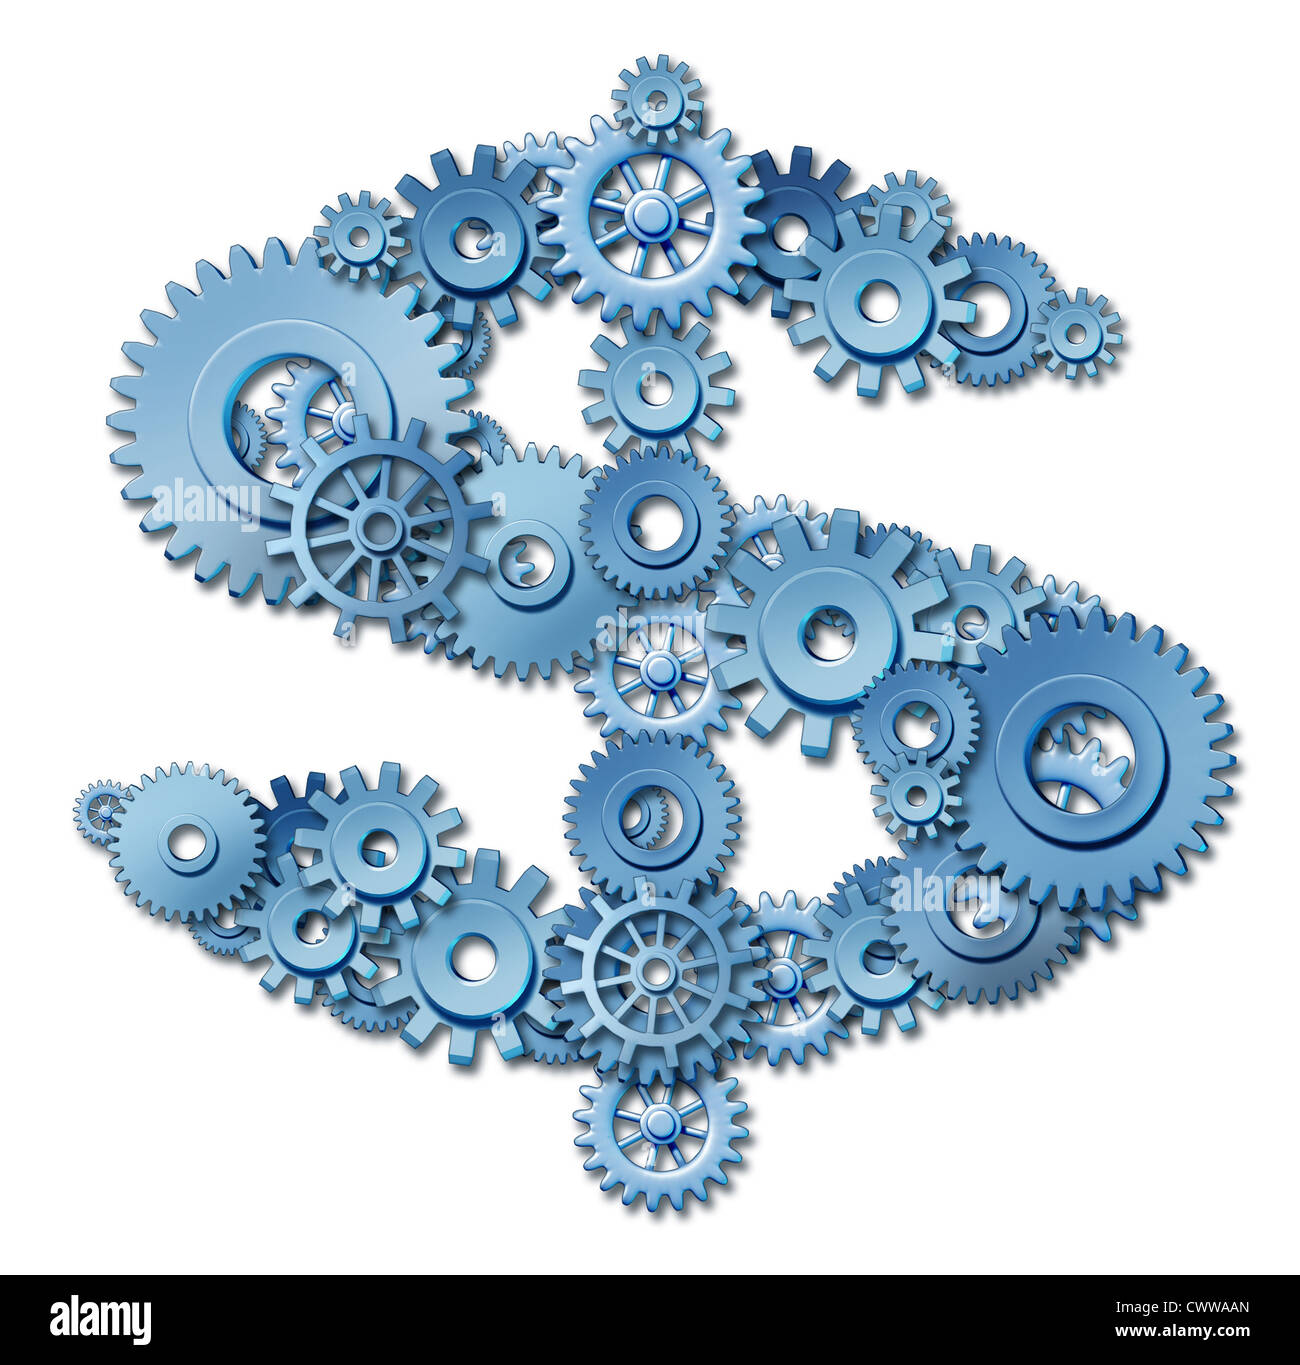 Making money and building wealth through connections and networking symbol represented by a shape of a dollar sign made of gears and coggs showing the concept of success and profits from manufacturing at factories and providing services. Stock Photo